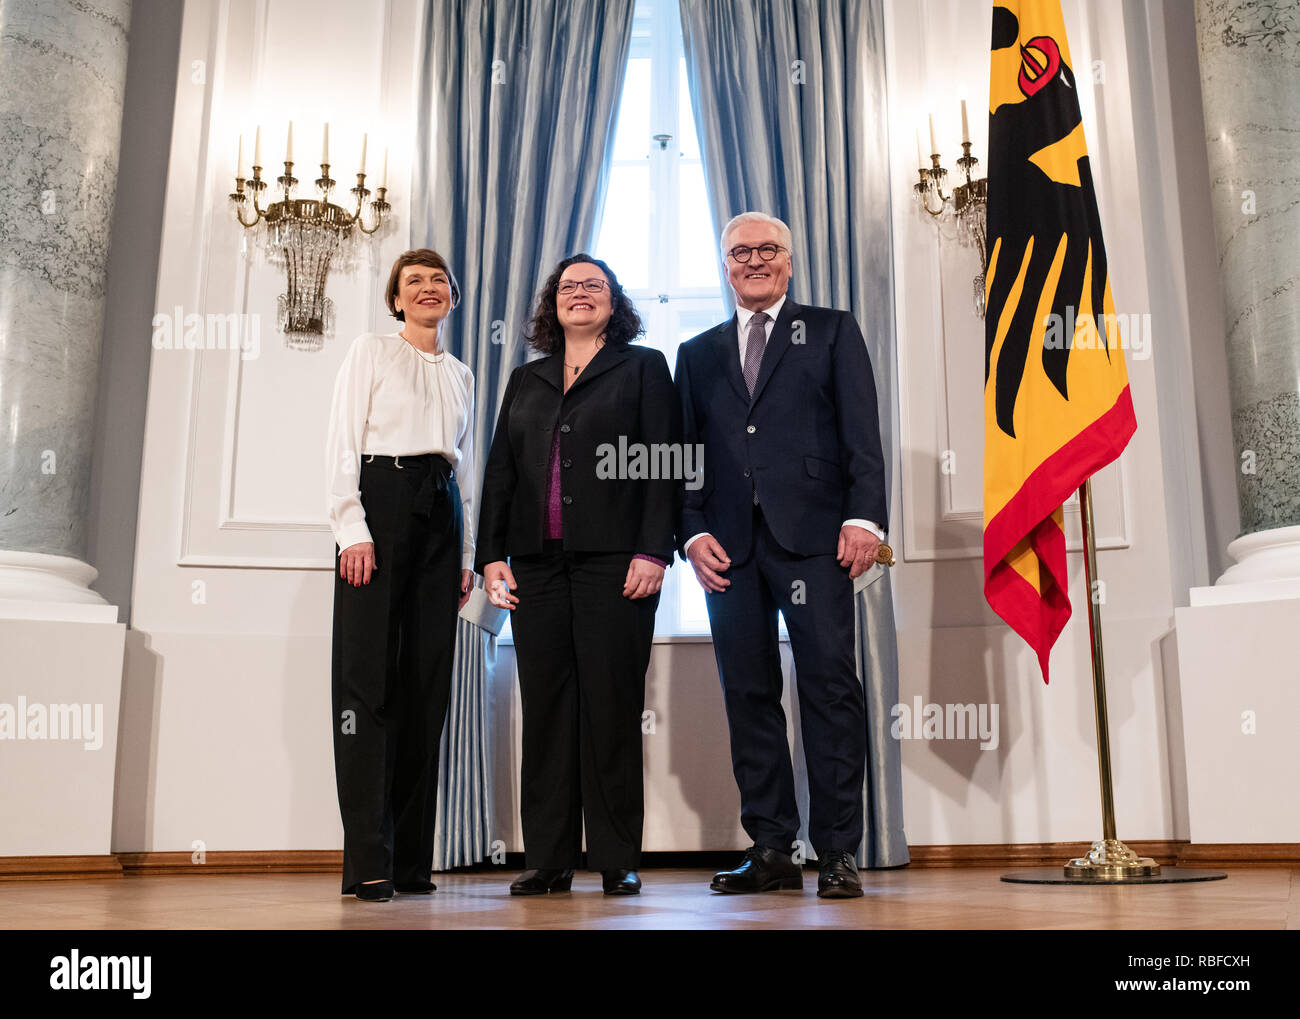 Berlin, Germany. 10th Jan, 2019. Andrea Nahles (M), chairwoman of the SPD, is welcomed by Federal President Frank-Walter Steinmeier and his wife Elke Büdenbender at the Federal President's New Year's reception in Bellevue Castle. In addition to representatives of public life, around 70 citizens from all federal states who have rendered outstanding services to the common good are invited. Credit: Bernd von Jutrczenka/dpa/Alamy Live News Stock Photo